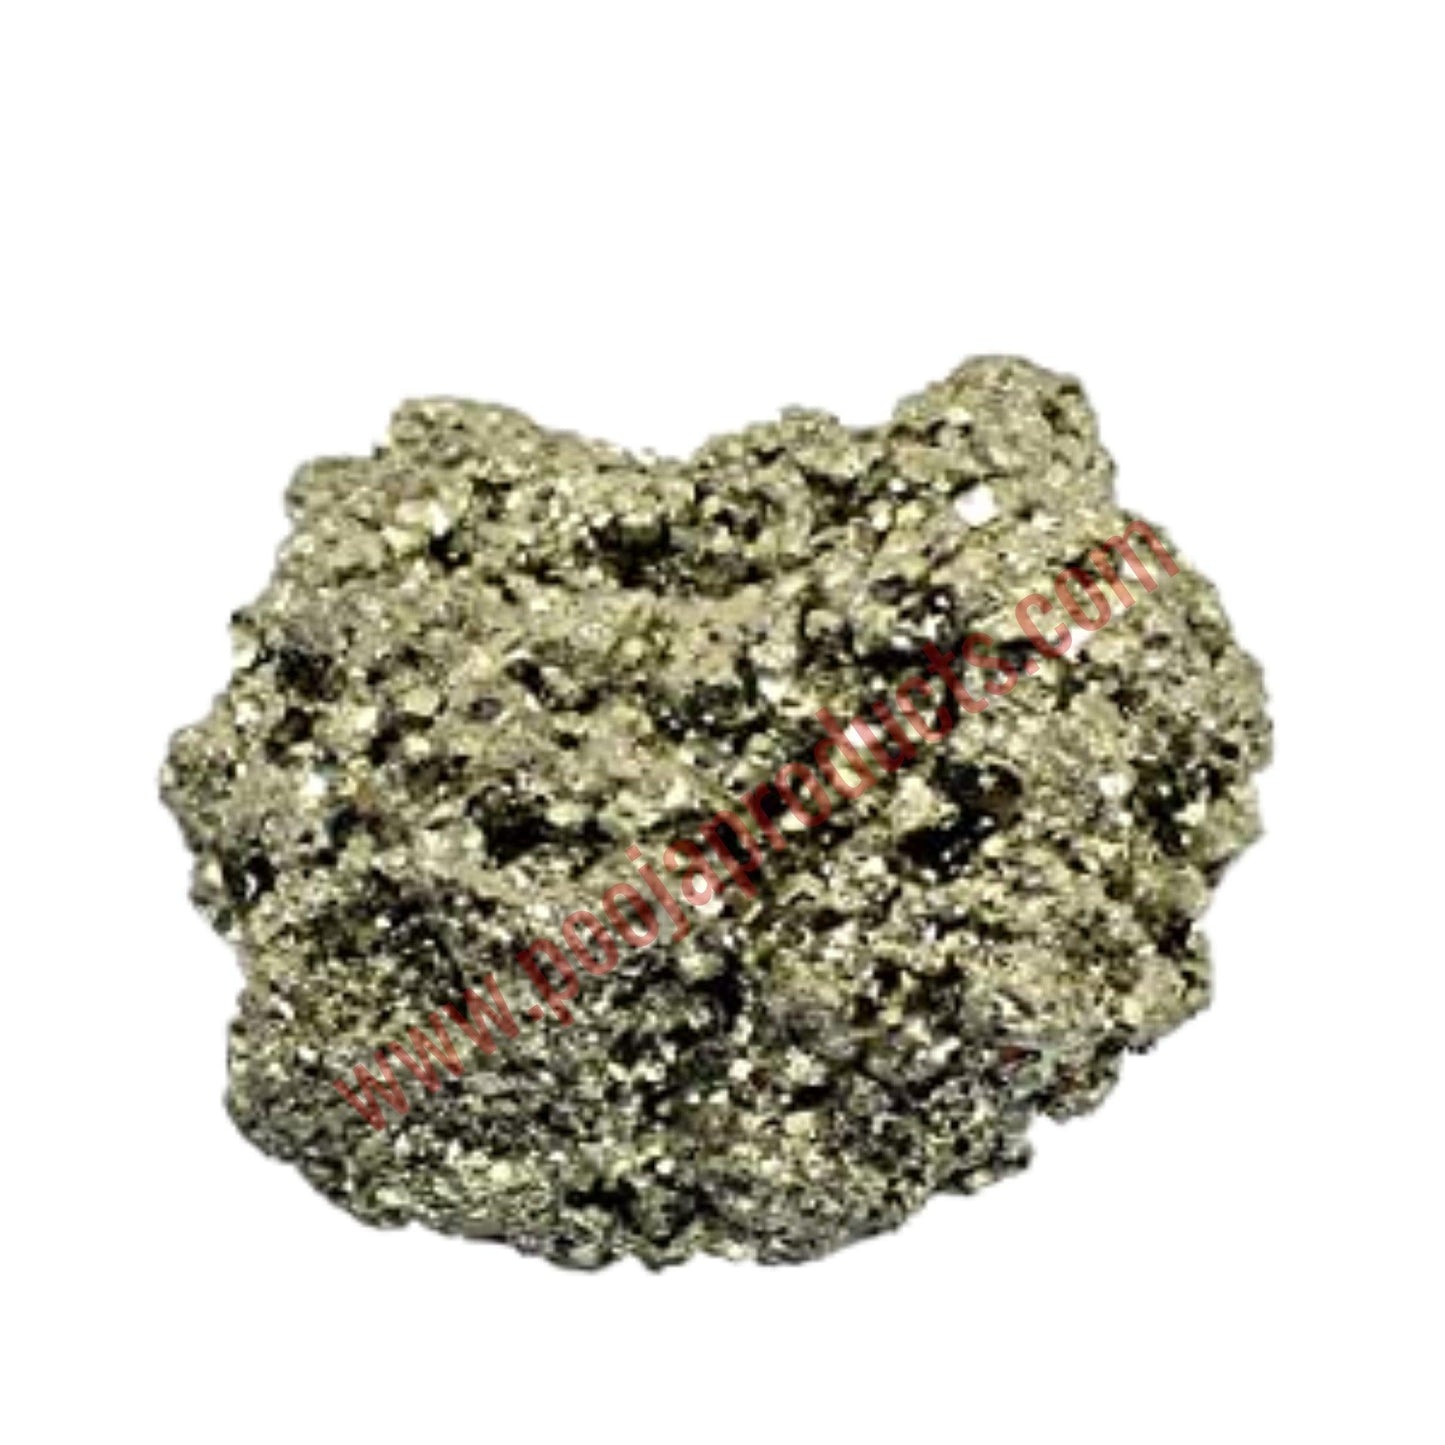 Pyrite Stone - PoojaProducts.com